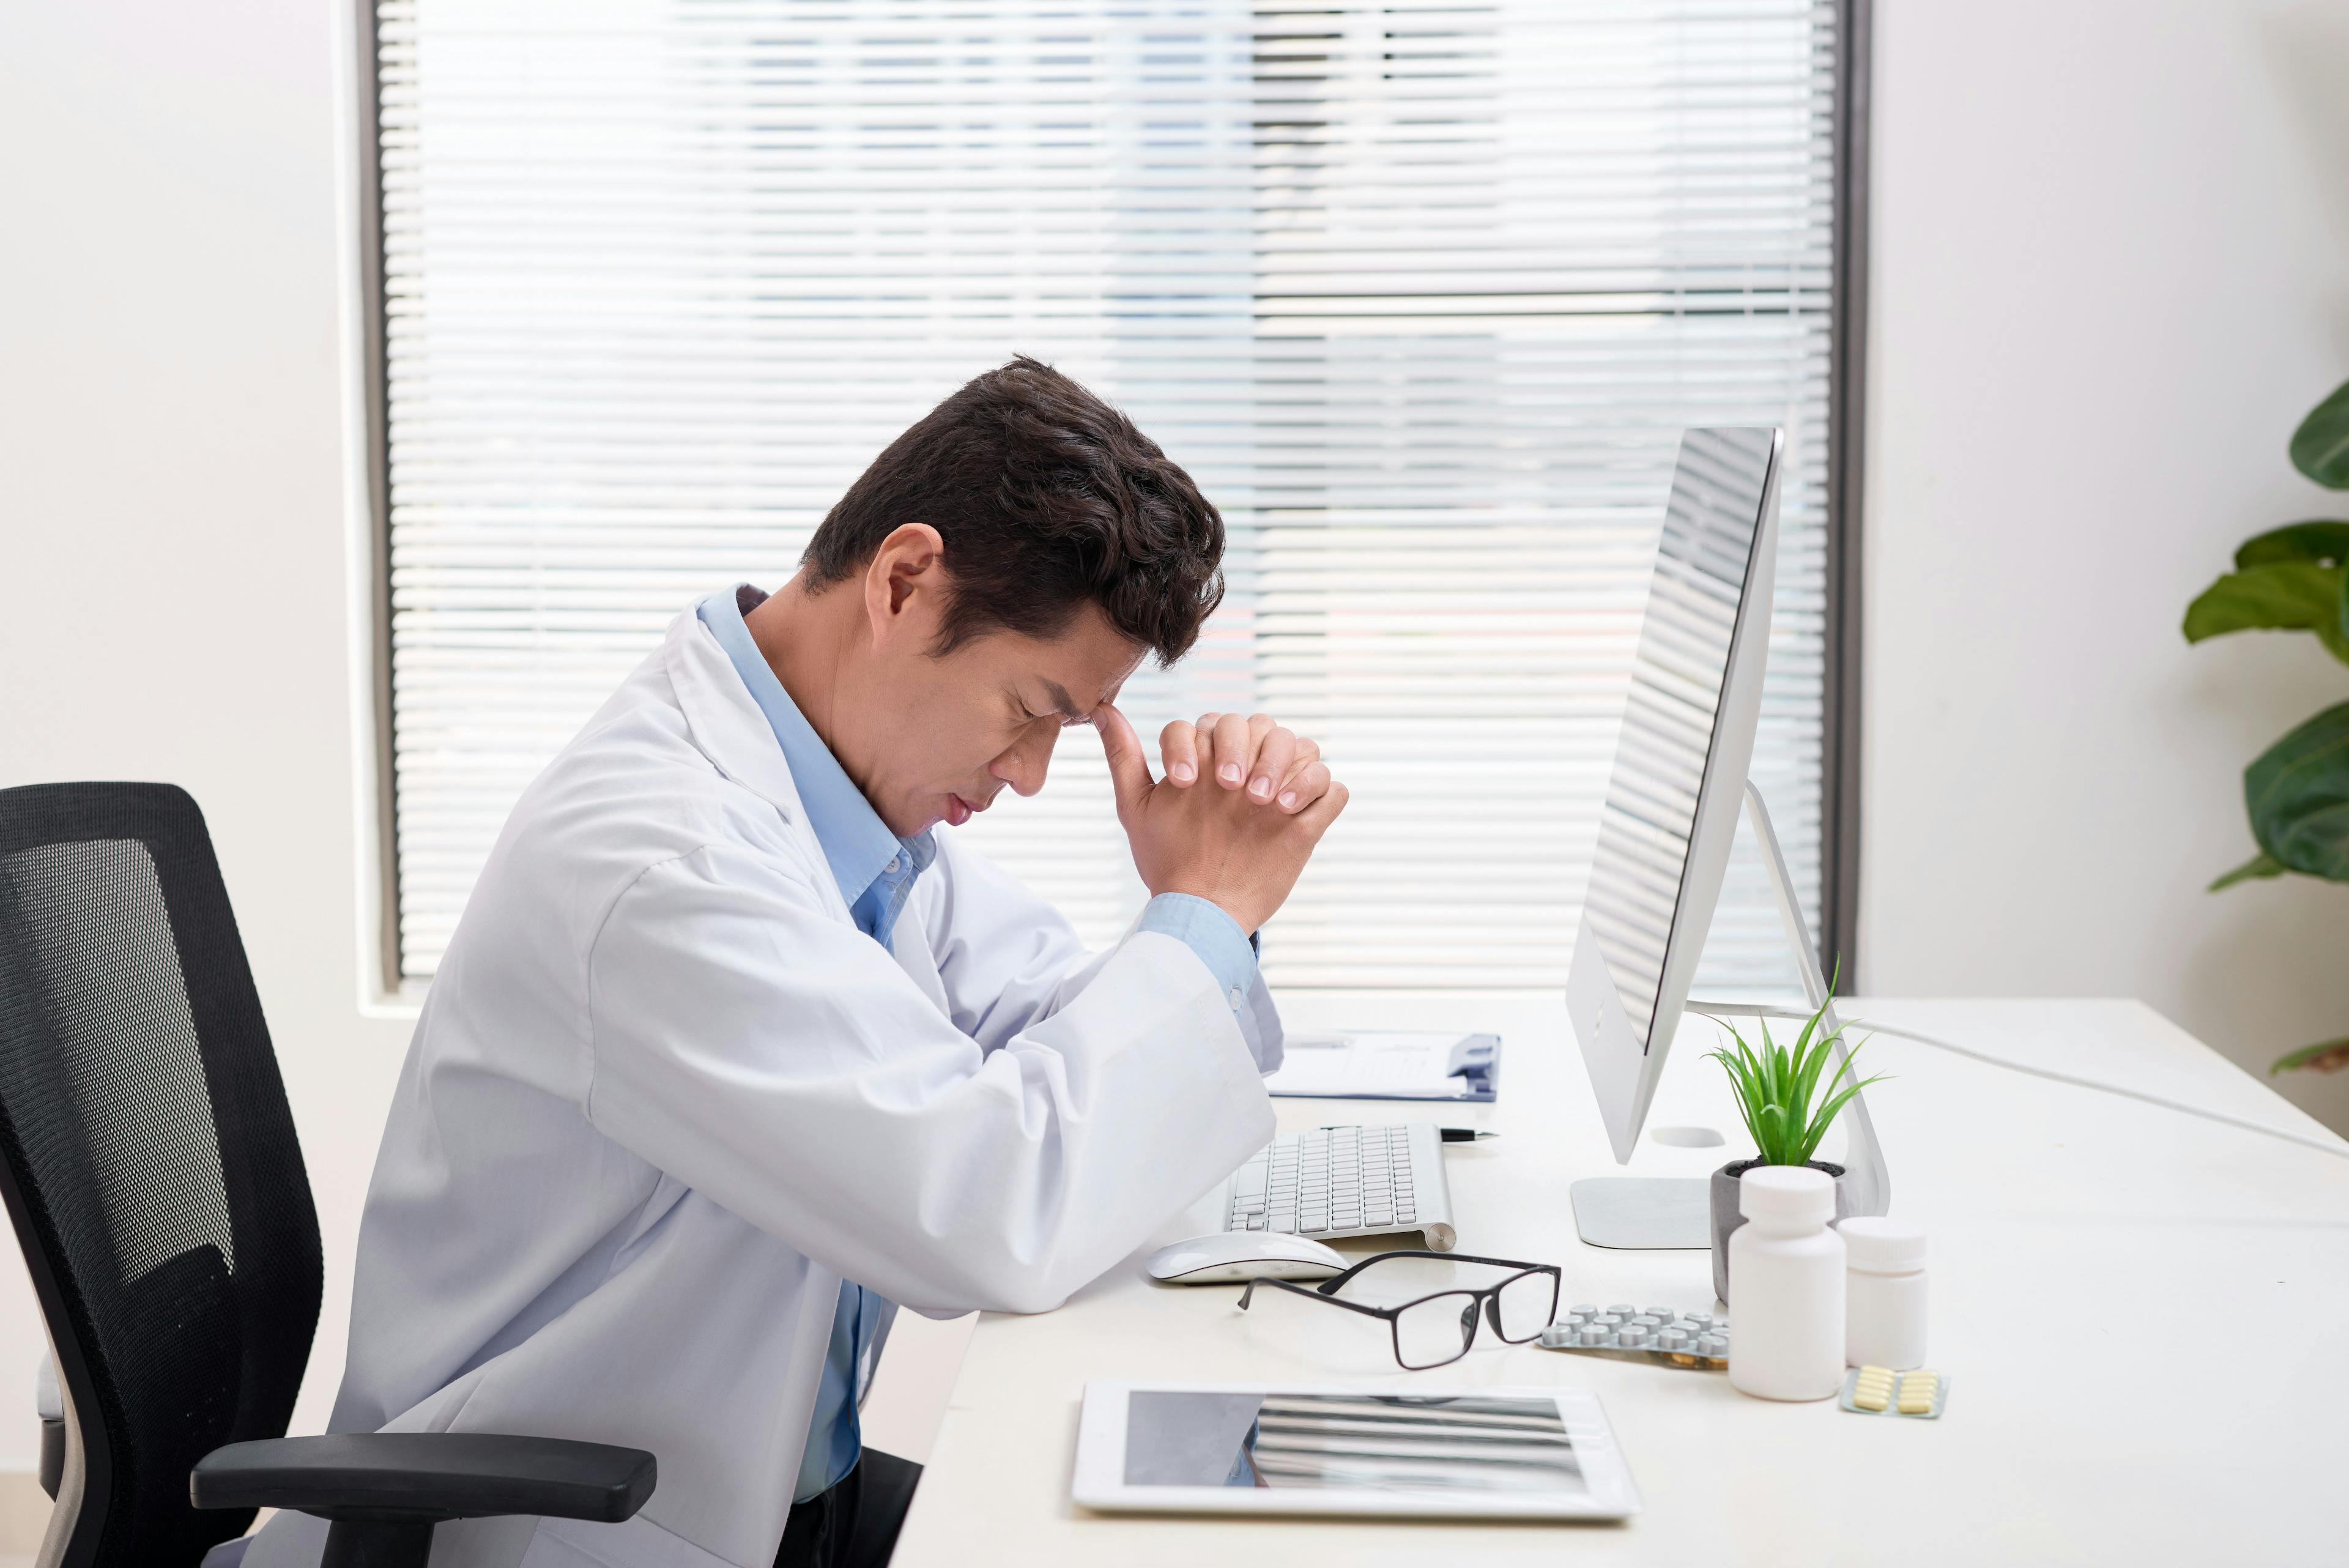 Poll: Are you feeling the effects of burnout?